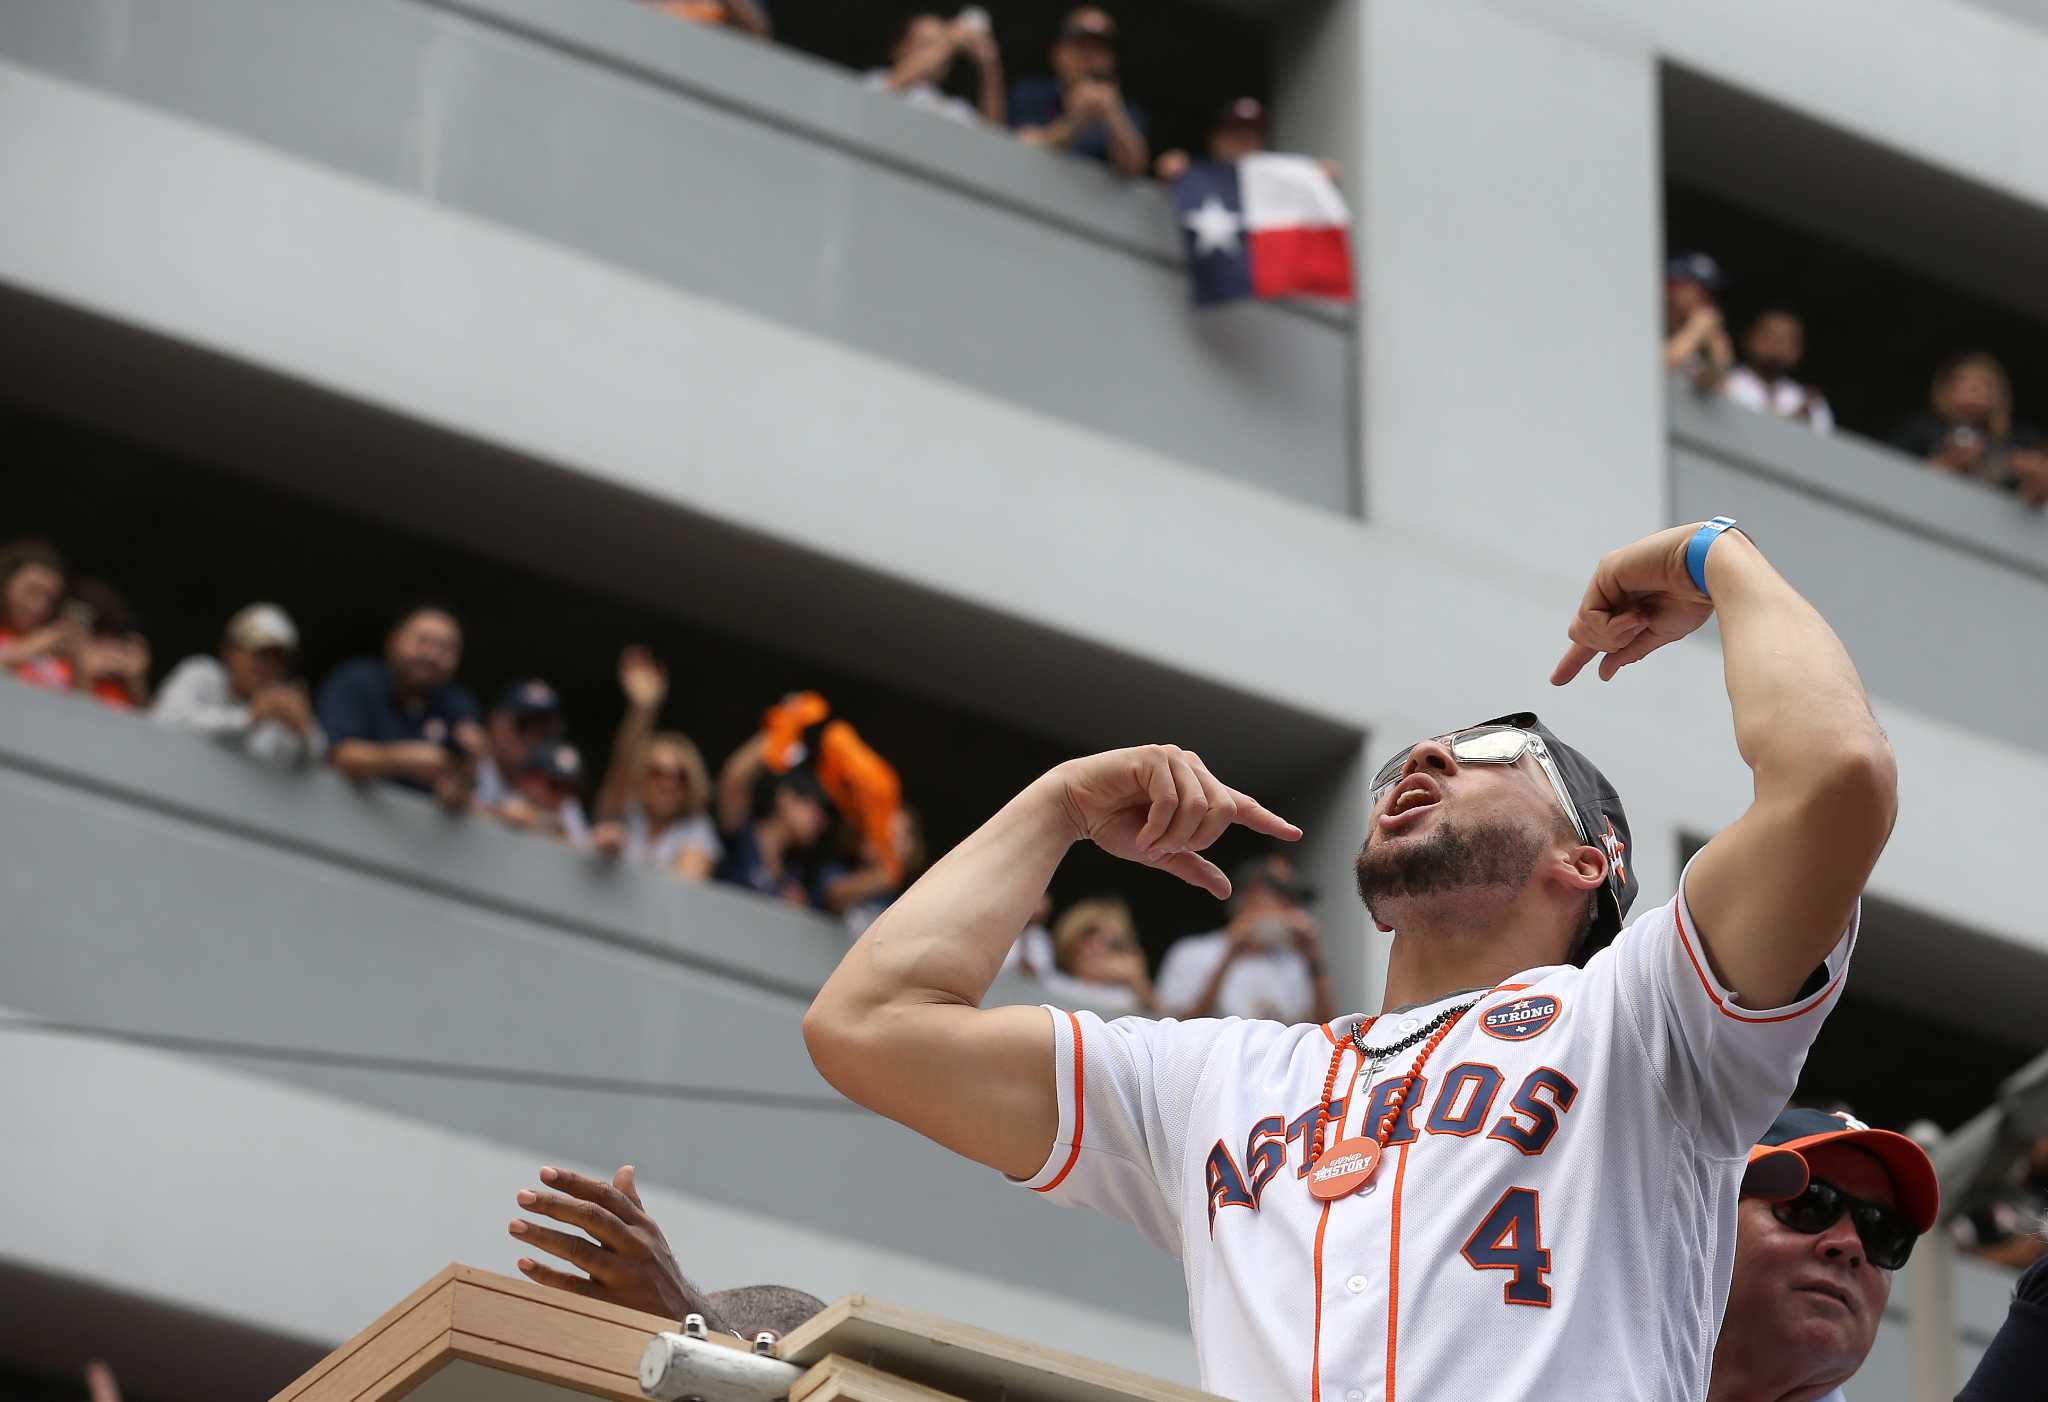 Astros fans fight at victory parade in viral video